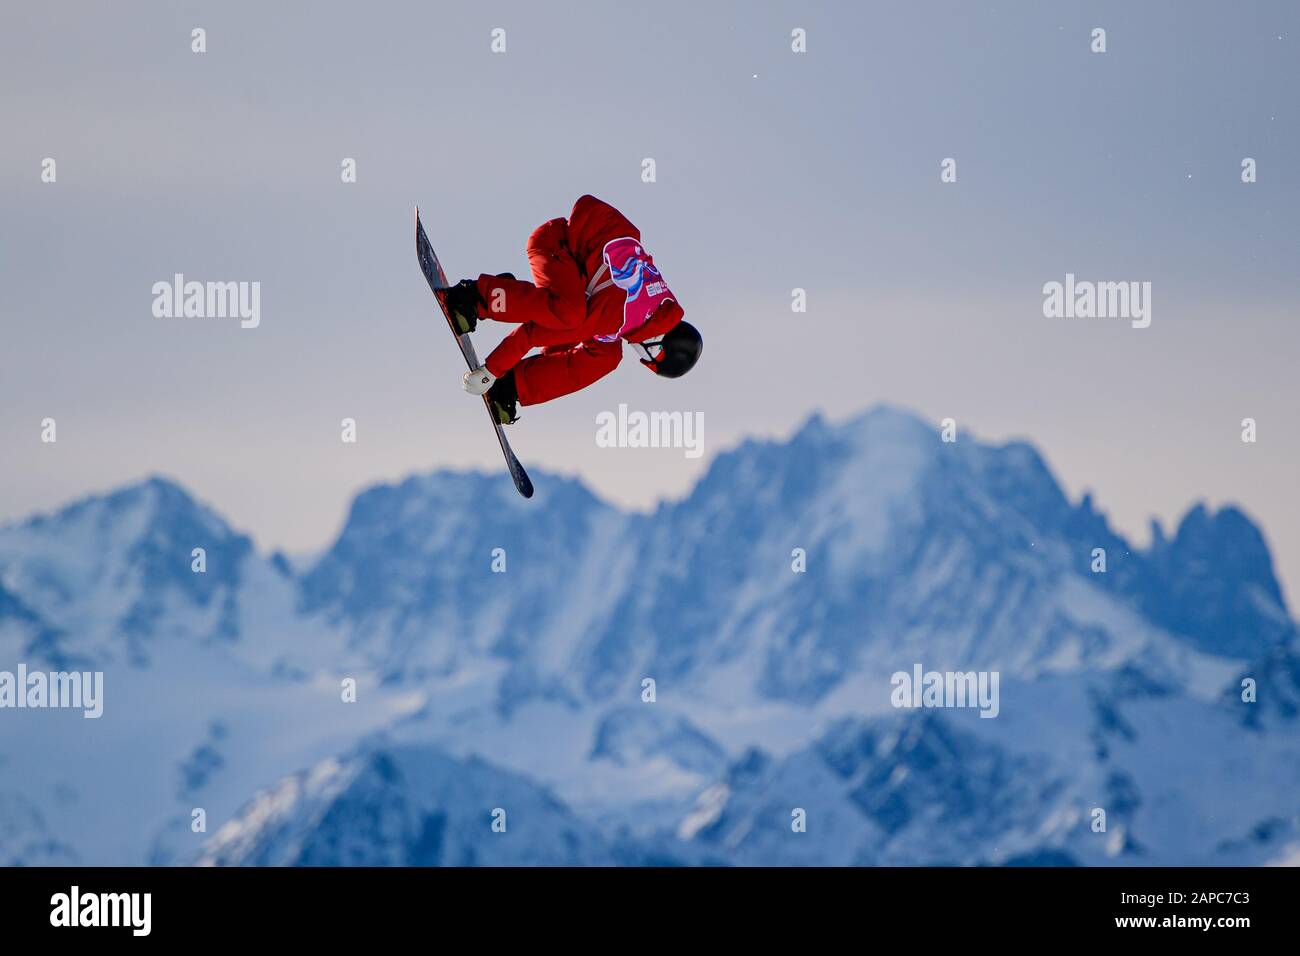 LAUSANNE, SWITZERLAND. 22th, Jan 2020. MATHISEN William (SWE) competes in the Snowboard: Men's Big Air competitions during the Lausanne 2020 Youth Olympic Games at Leysin Park & Pipe on Wednesday, 22 January 2020. LAUSANNE, SWITZERLAND. Credit: Taka G Wu/Alamy Live News Stock Photo